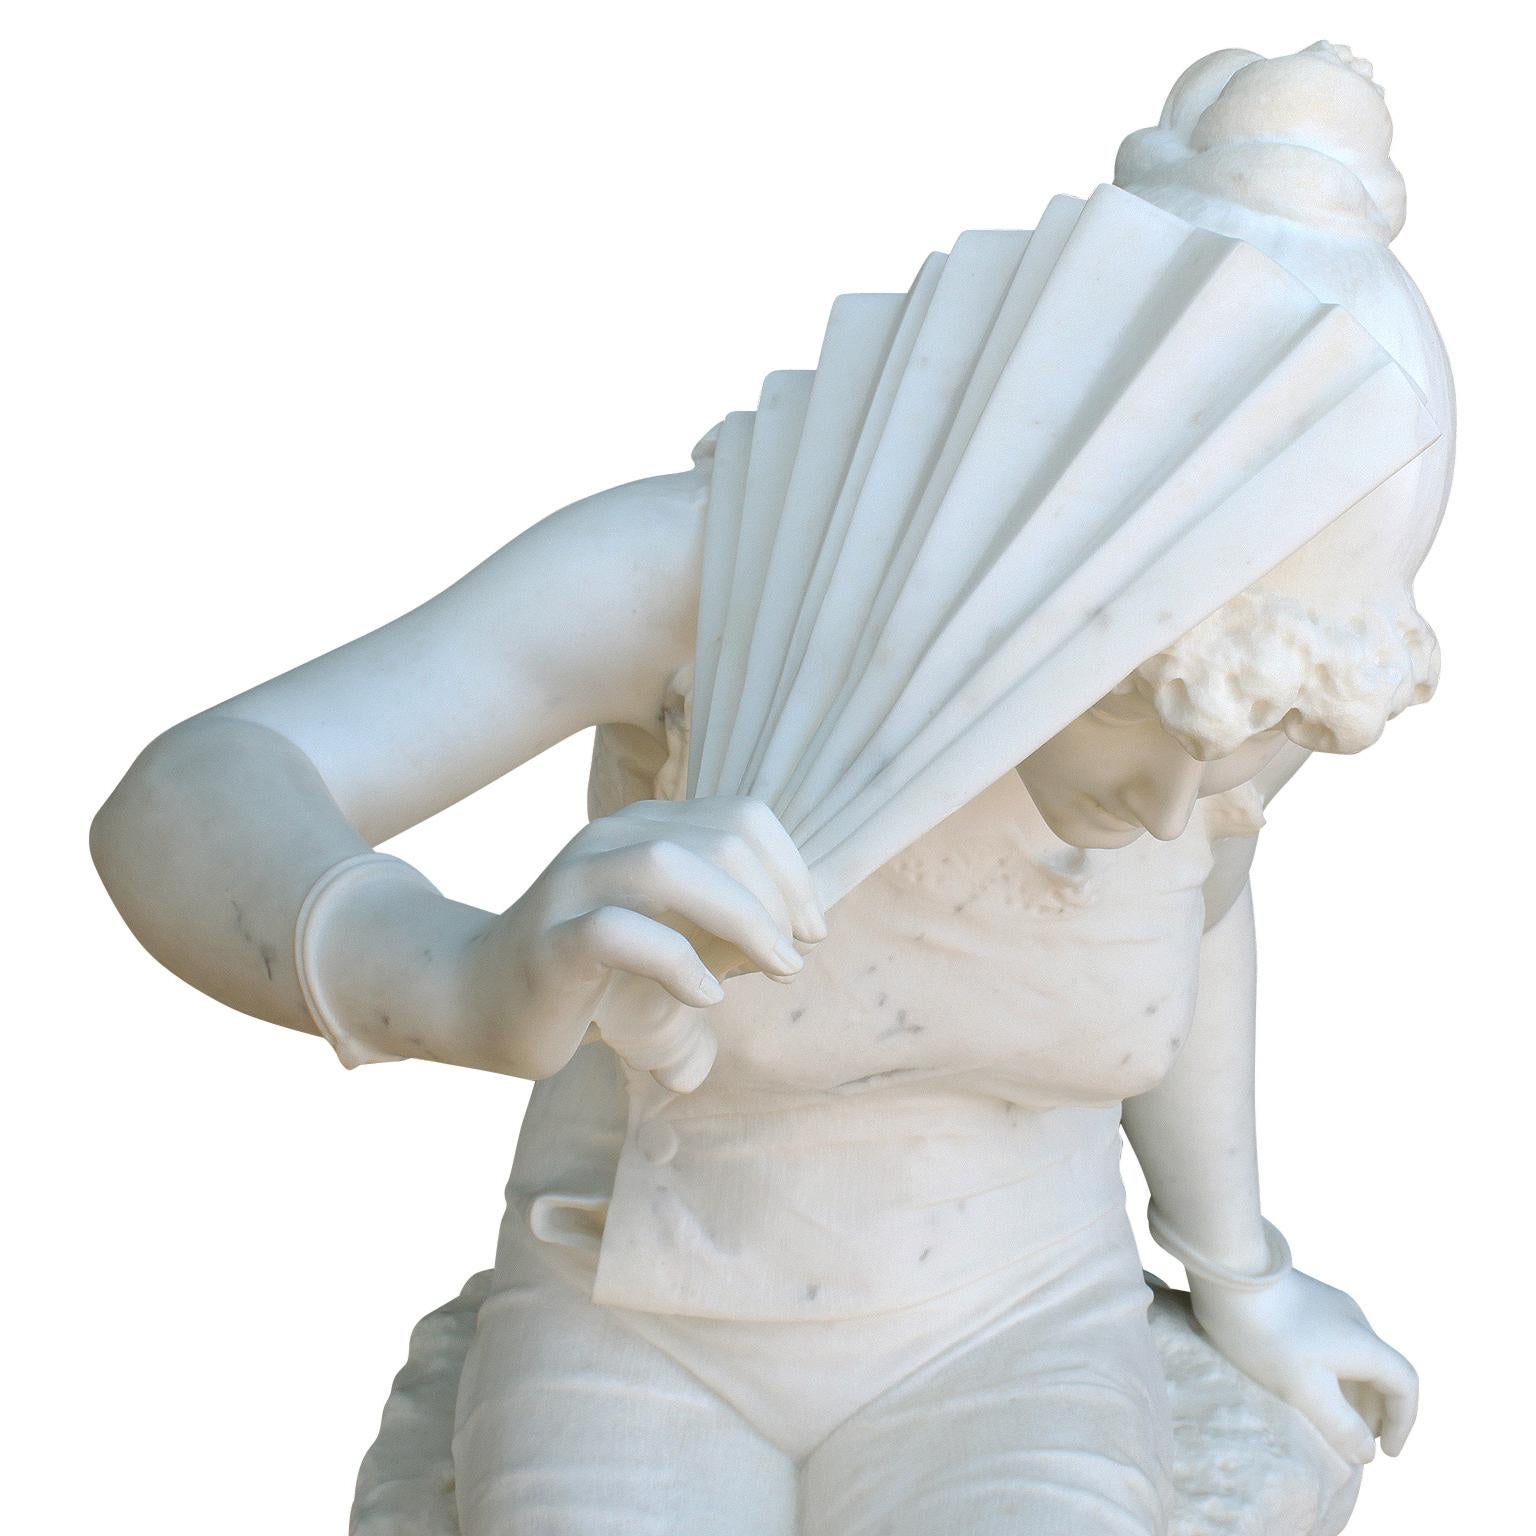 Italian Late 19th Century Belle Epoque Carved Marble Figure of a Bather Girl For Sale 6